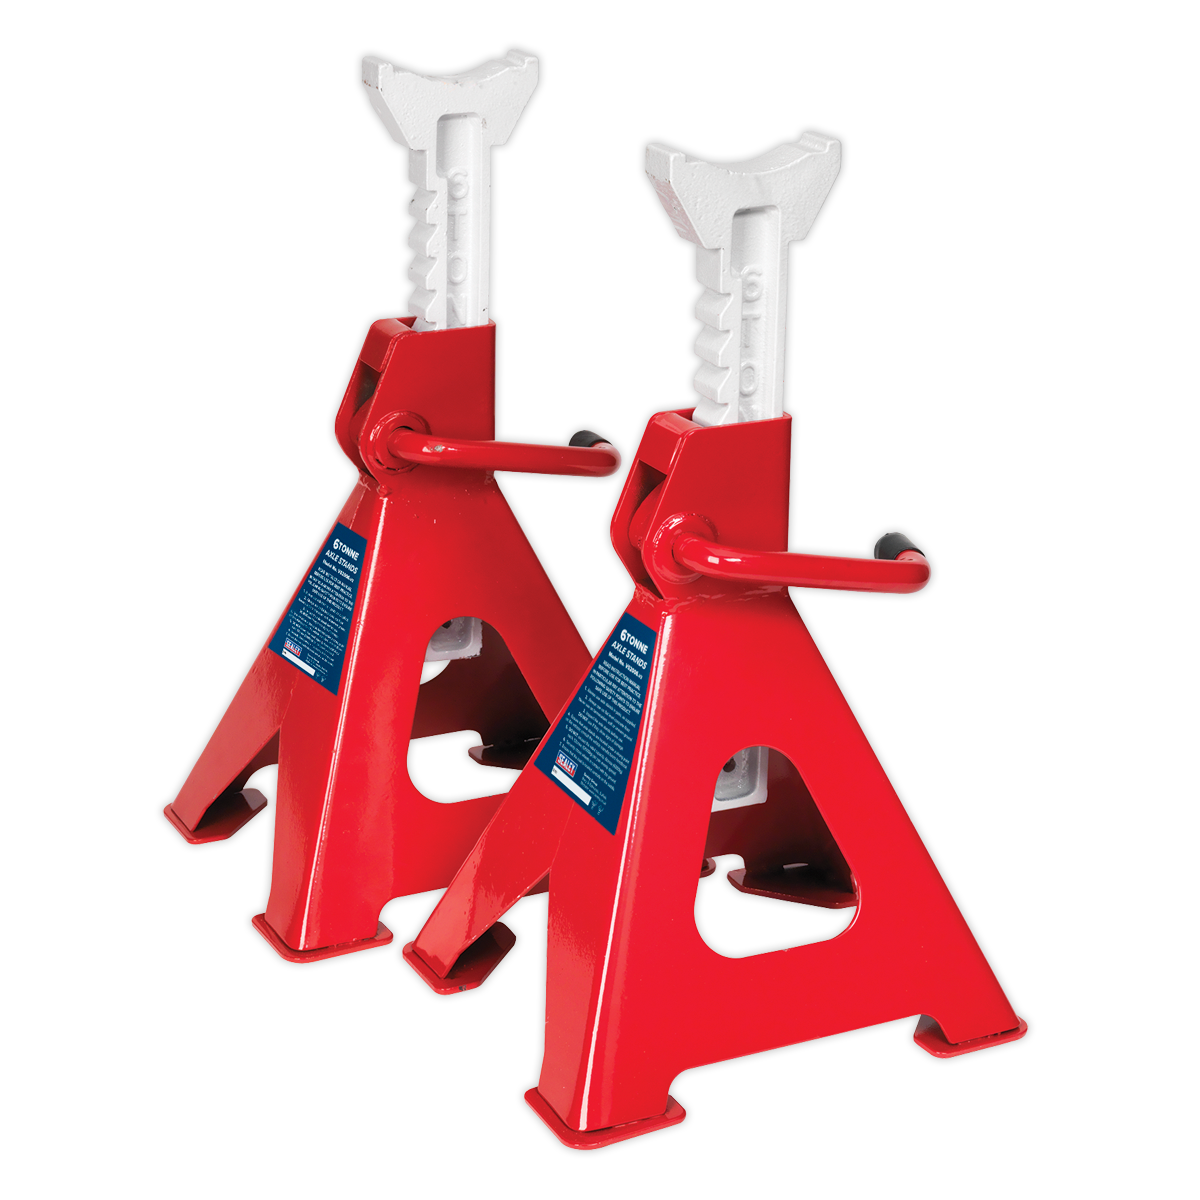 Sealey VS2006 Ratchet Type Axle Stands (Pair) 6 Tonne Capacity per Stand